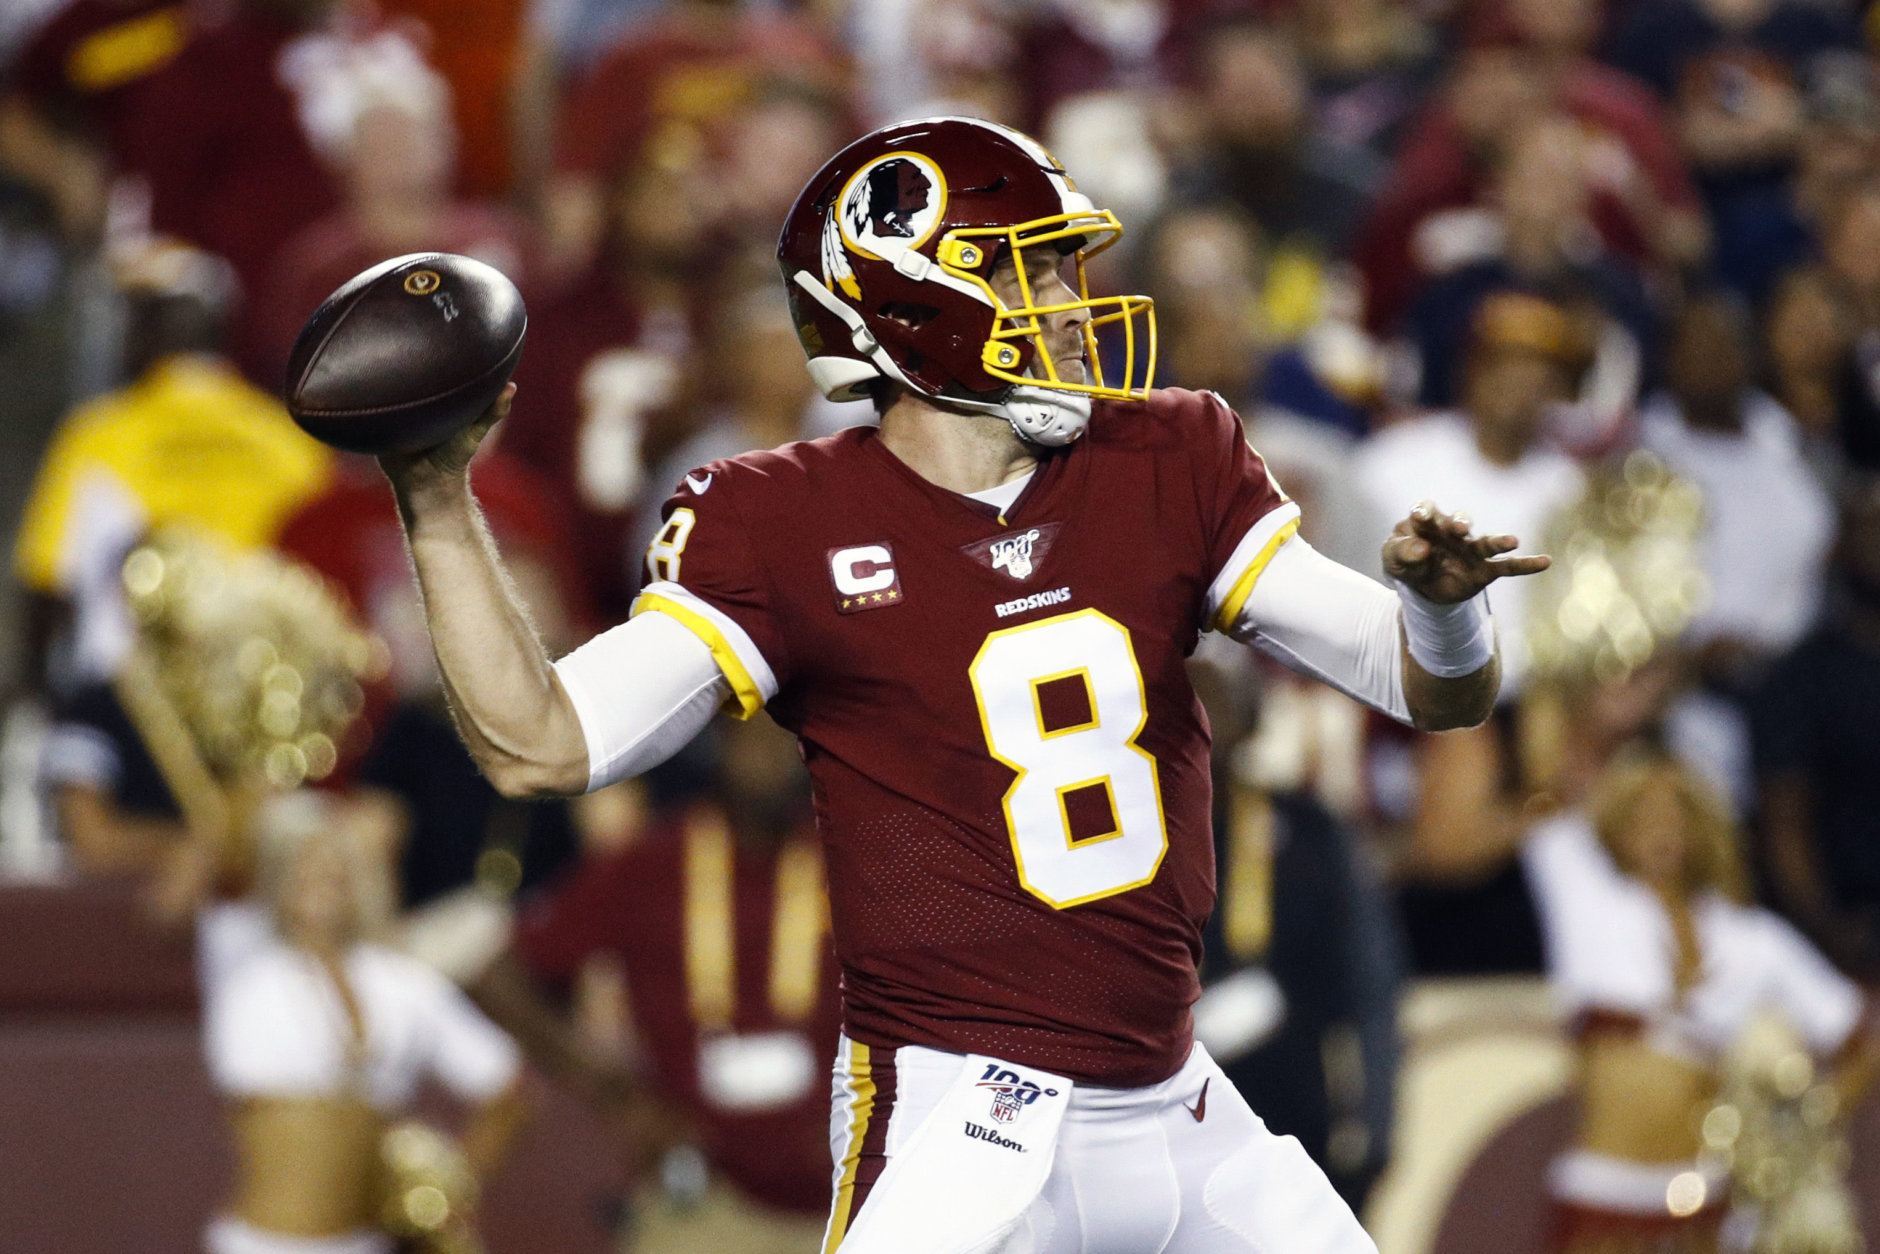 Washington Redskins quarterback Case Keenum throws during the first half of an NFL football game against the Chicago Bears, Monday, Sept. 23, 2019, in Landover, Md. (AP Photo/Patrick Semansky)